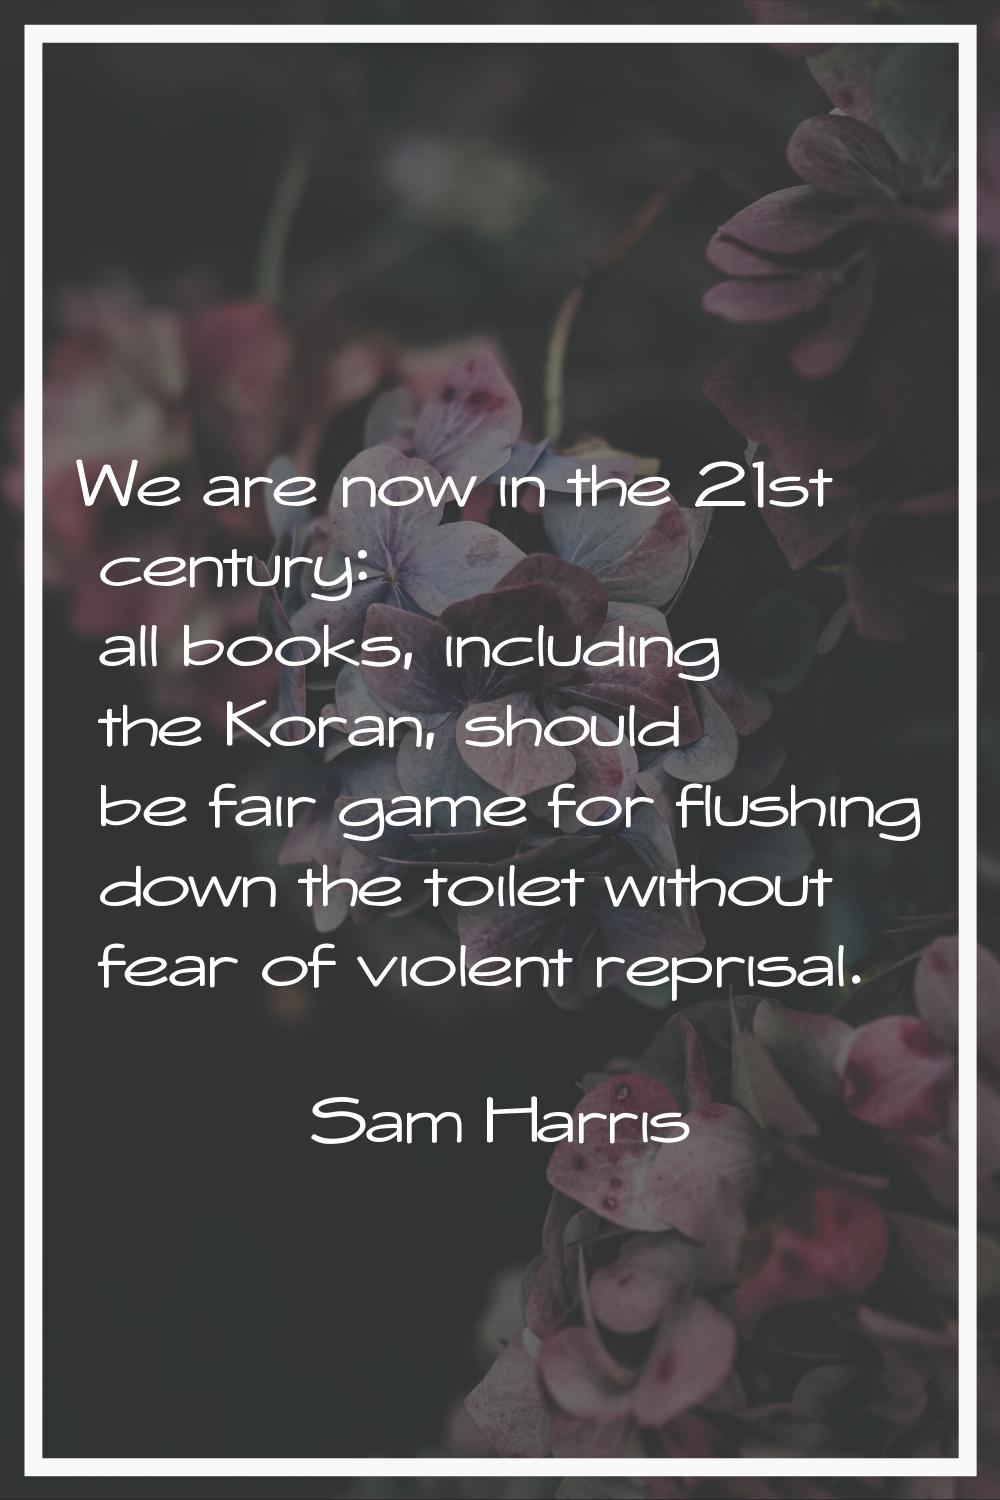 We are now in the 21st century: all books, including the Koran, should be fair game for flushing do